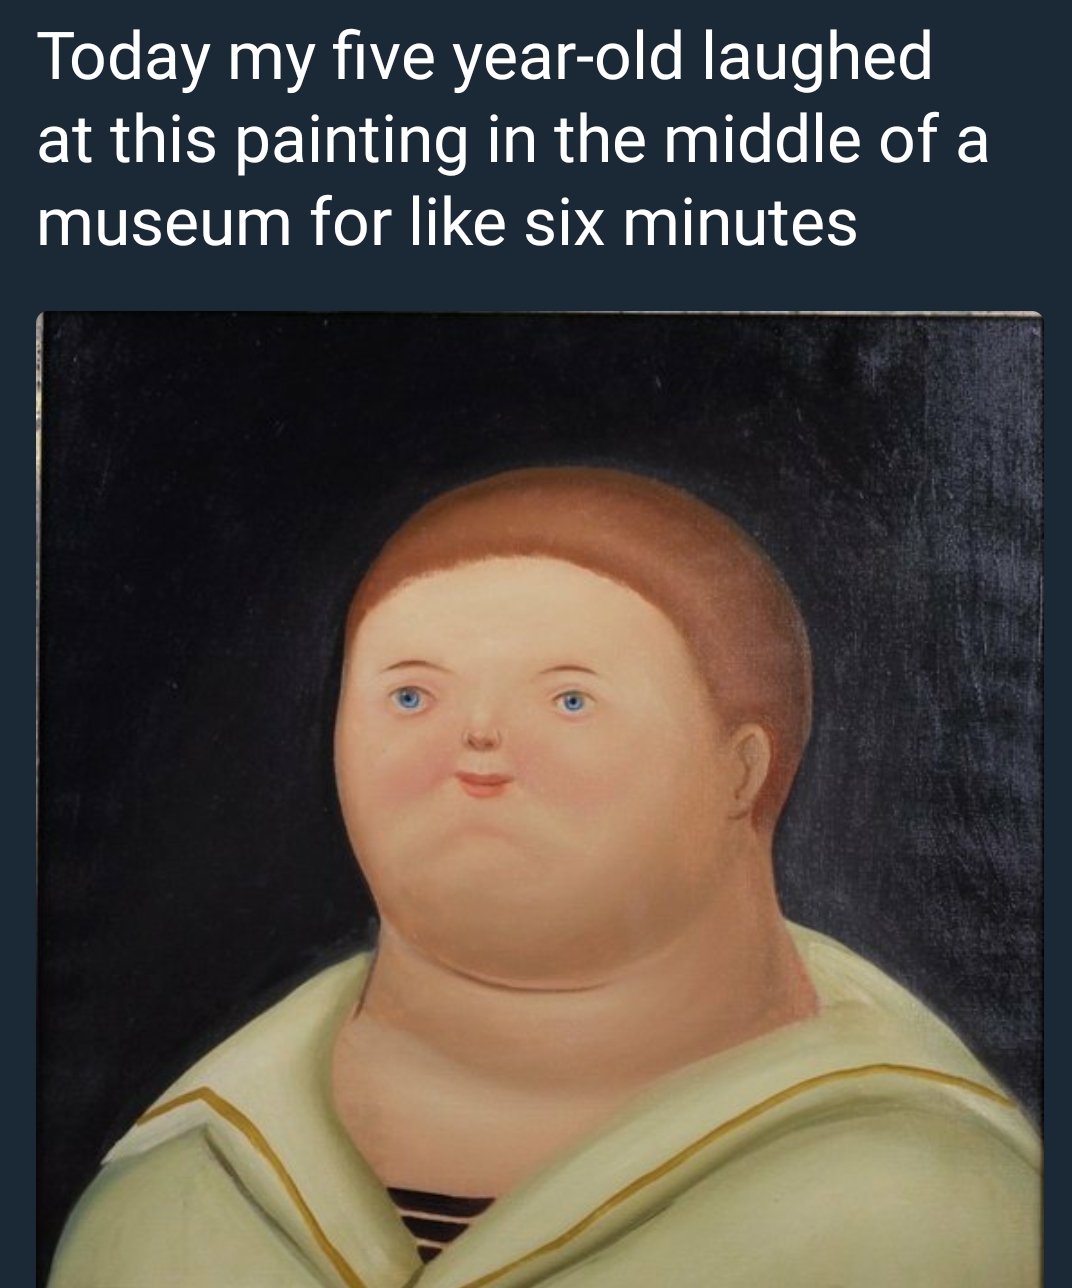 Art History is important